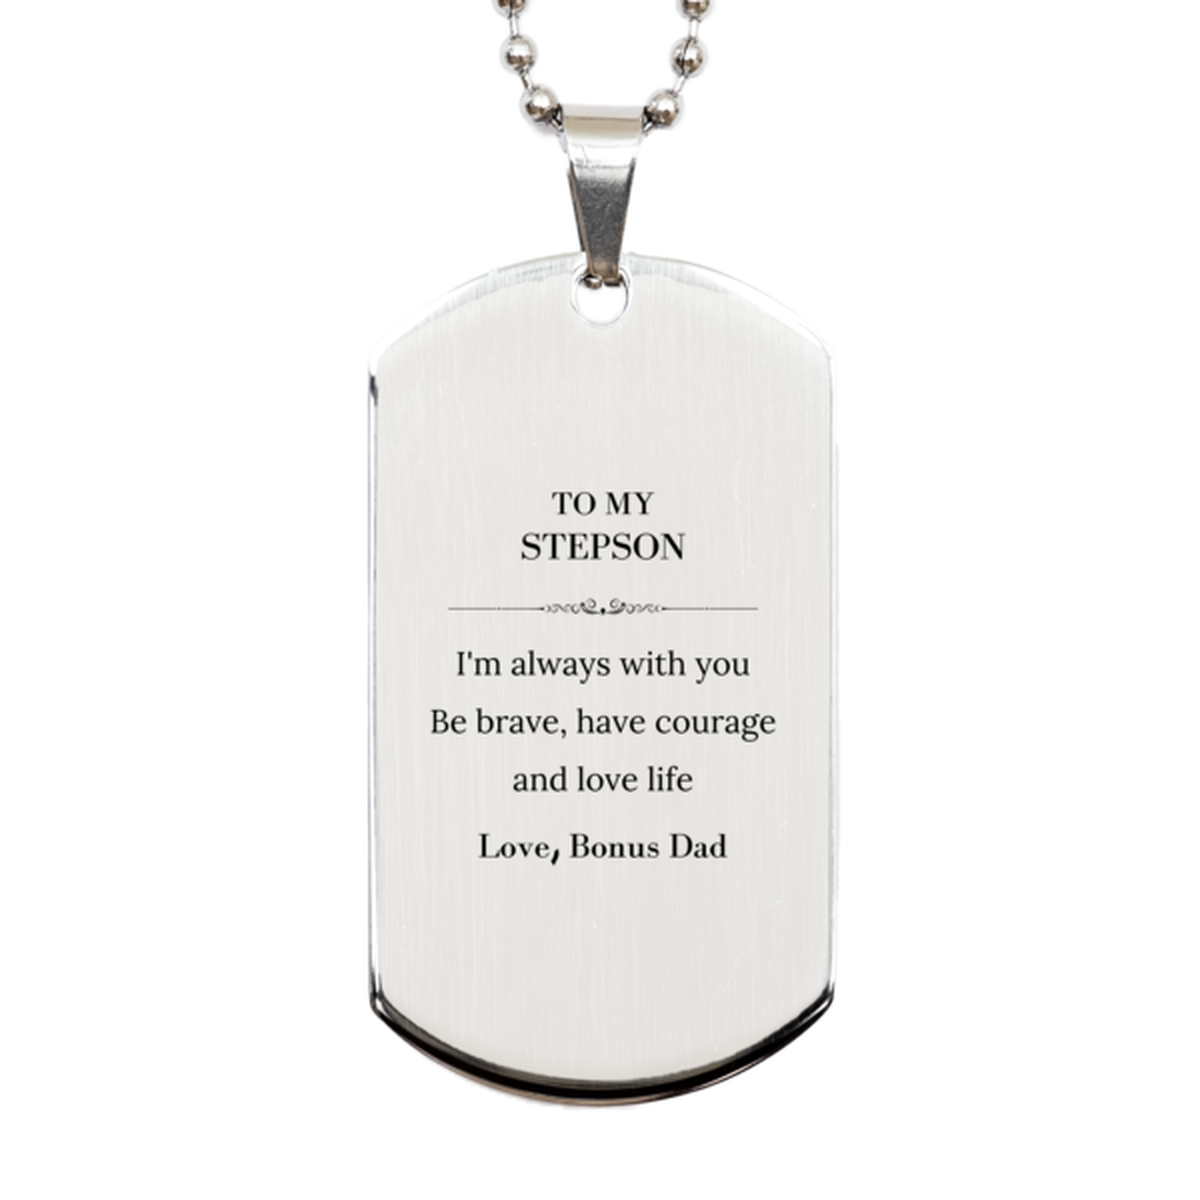 To My Stepson Gifts from Bonus Dad, Unique Silver Dog Tag Inspirational Christmas Birthday Graduation Gifts for Stepson I'm always with you. Be brave, have courage and love life. Love, Bonus Dad